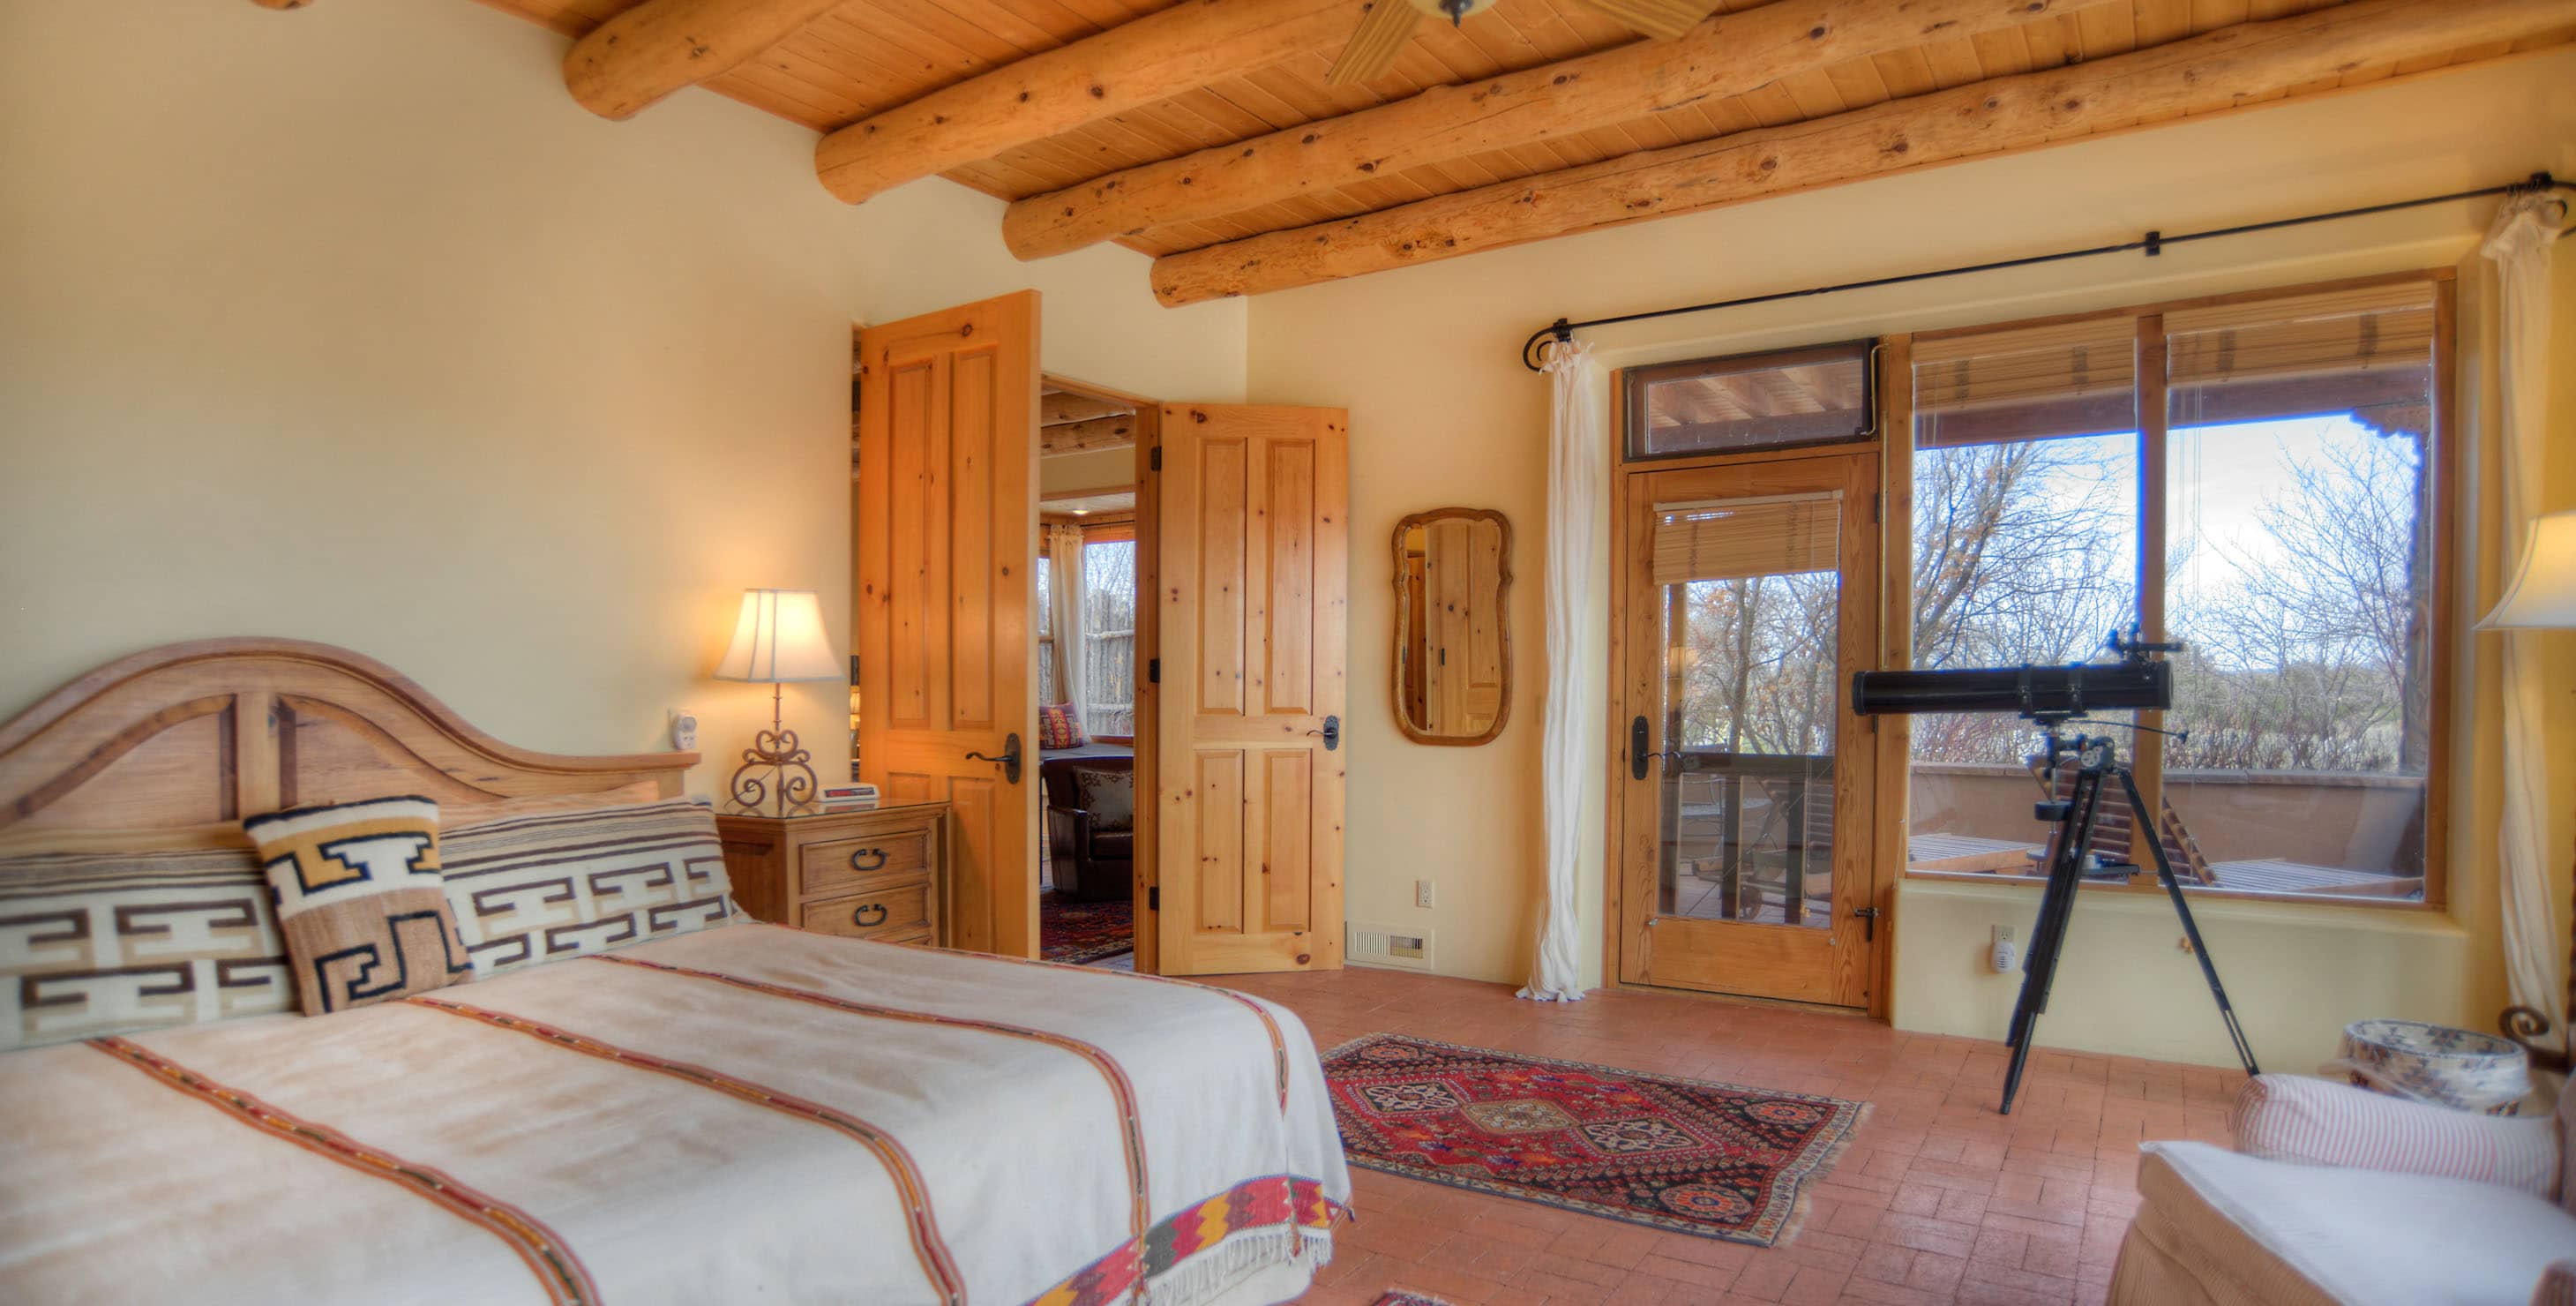 Spacious bedroom with king bed, seating area, double doors, and a doorway to a private patio